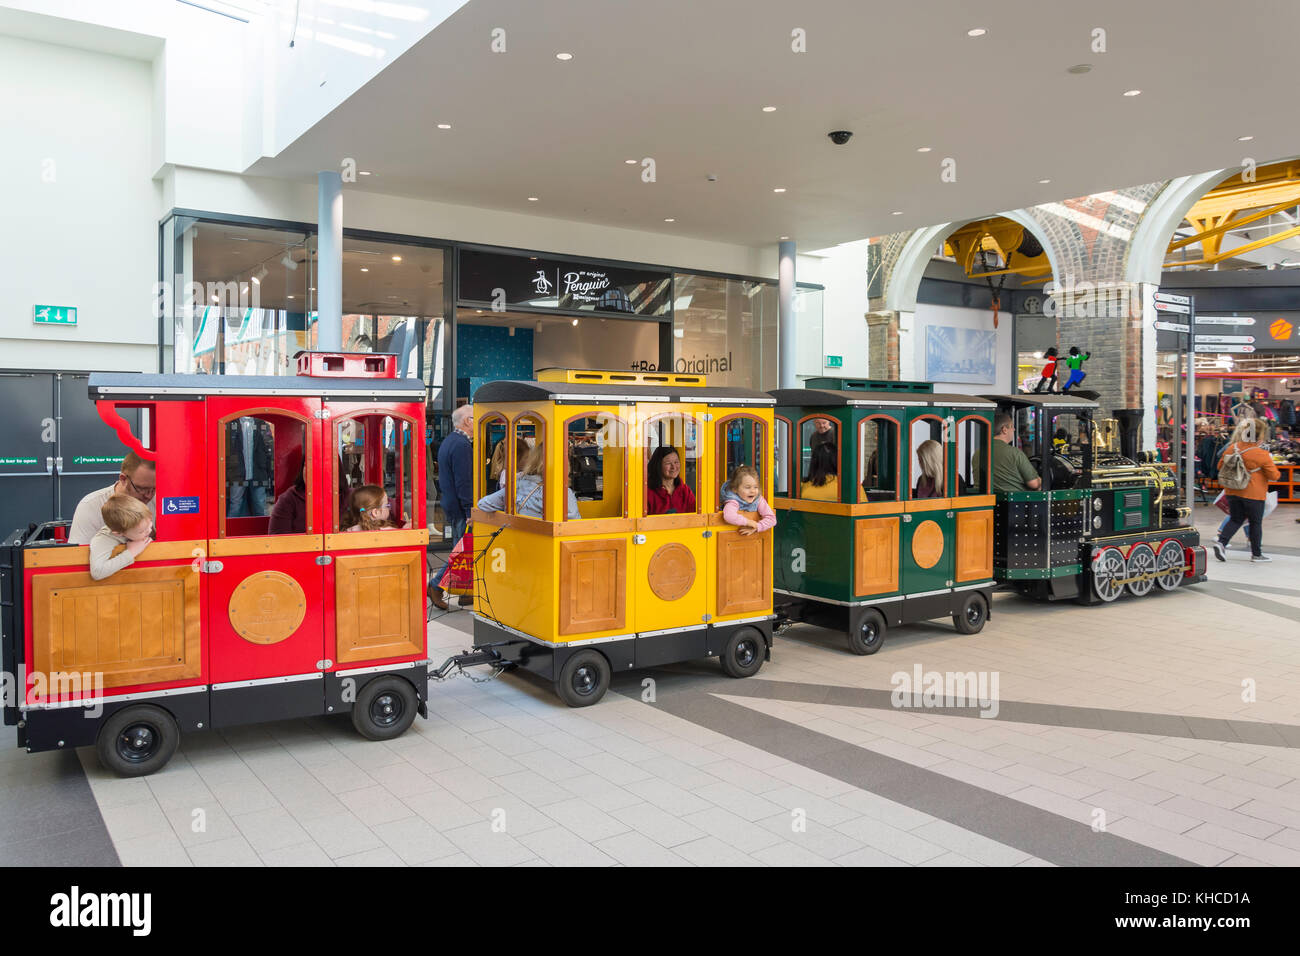 Hooter Express children's train at Swindon Designer Outlet Stores, Swindon, Wiltshire, England, United Kingdom Stock Photo